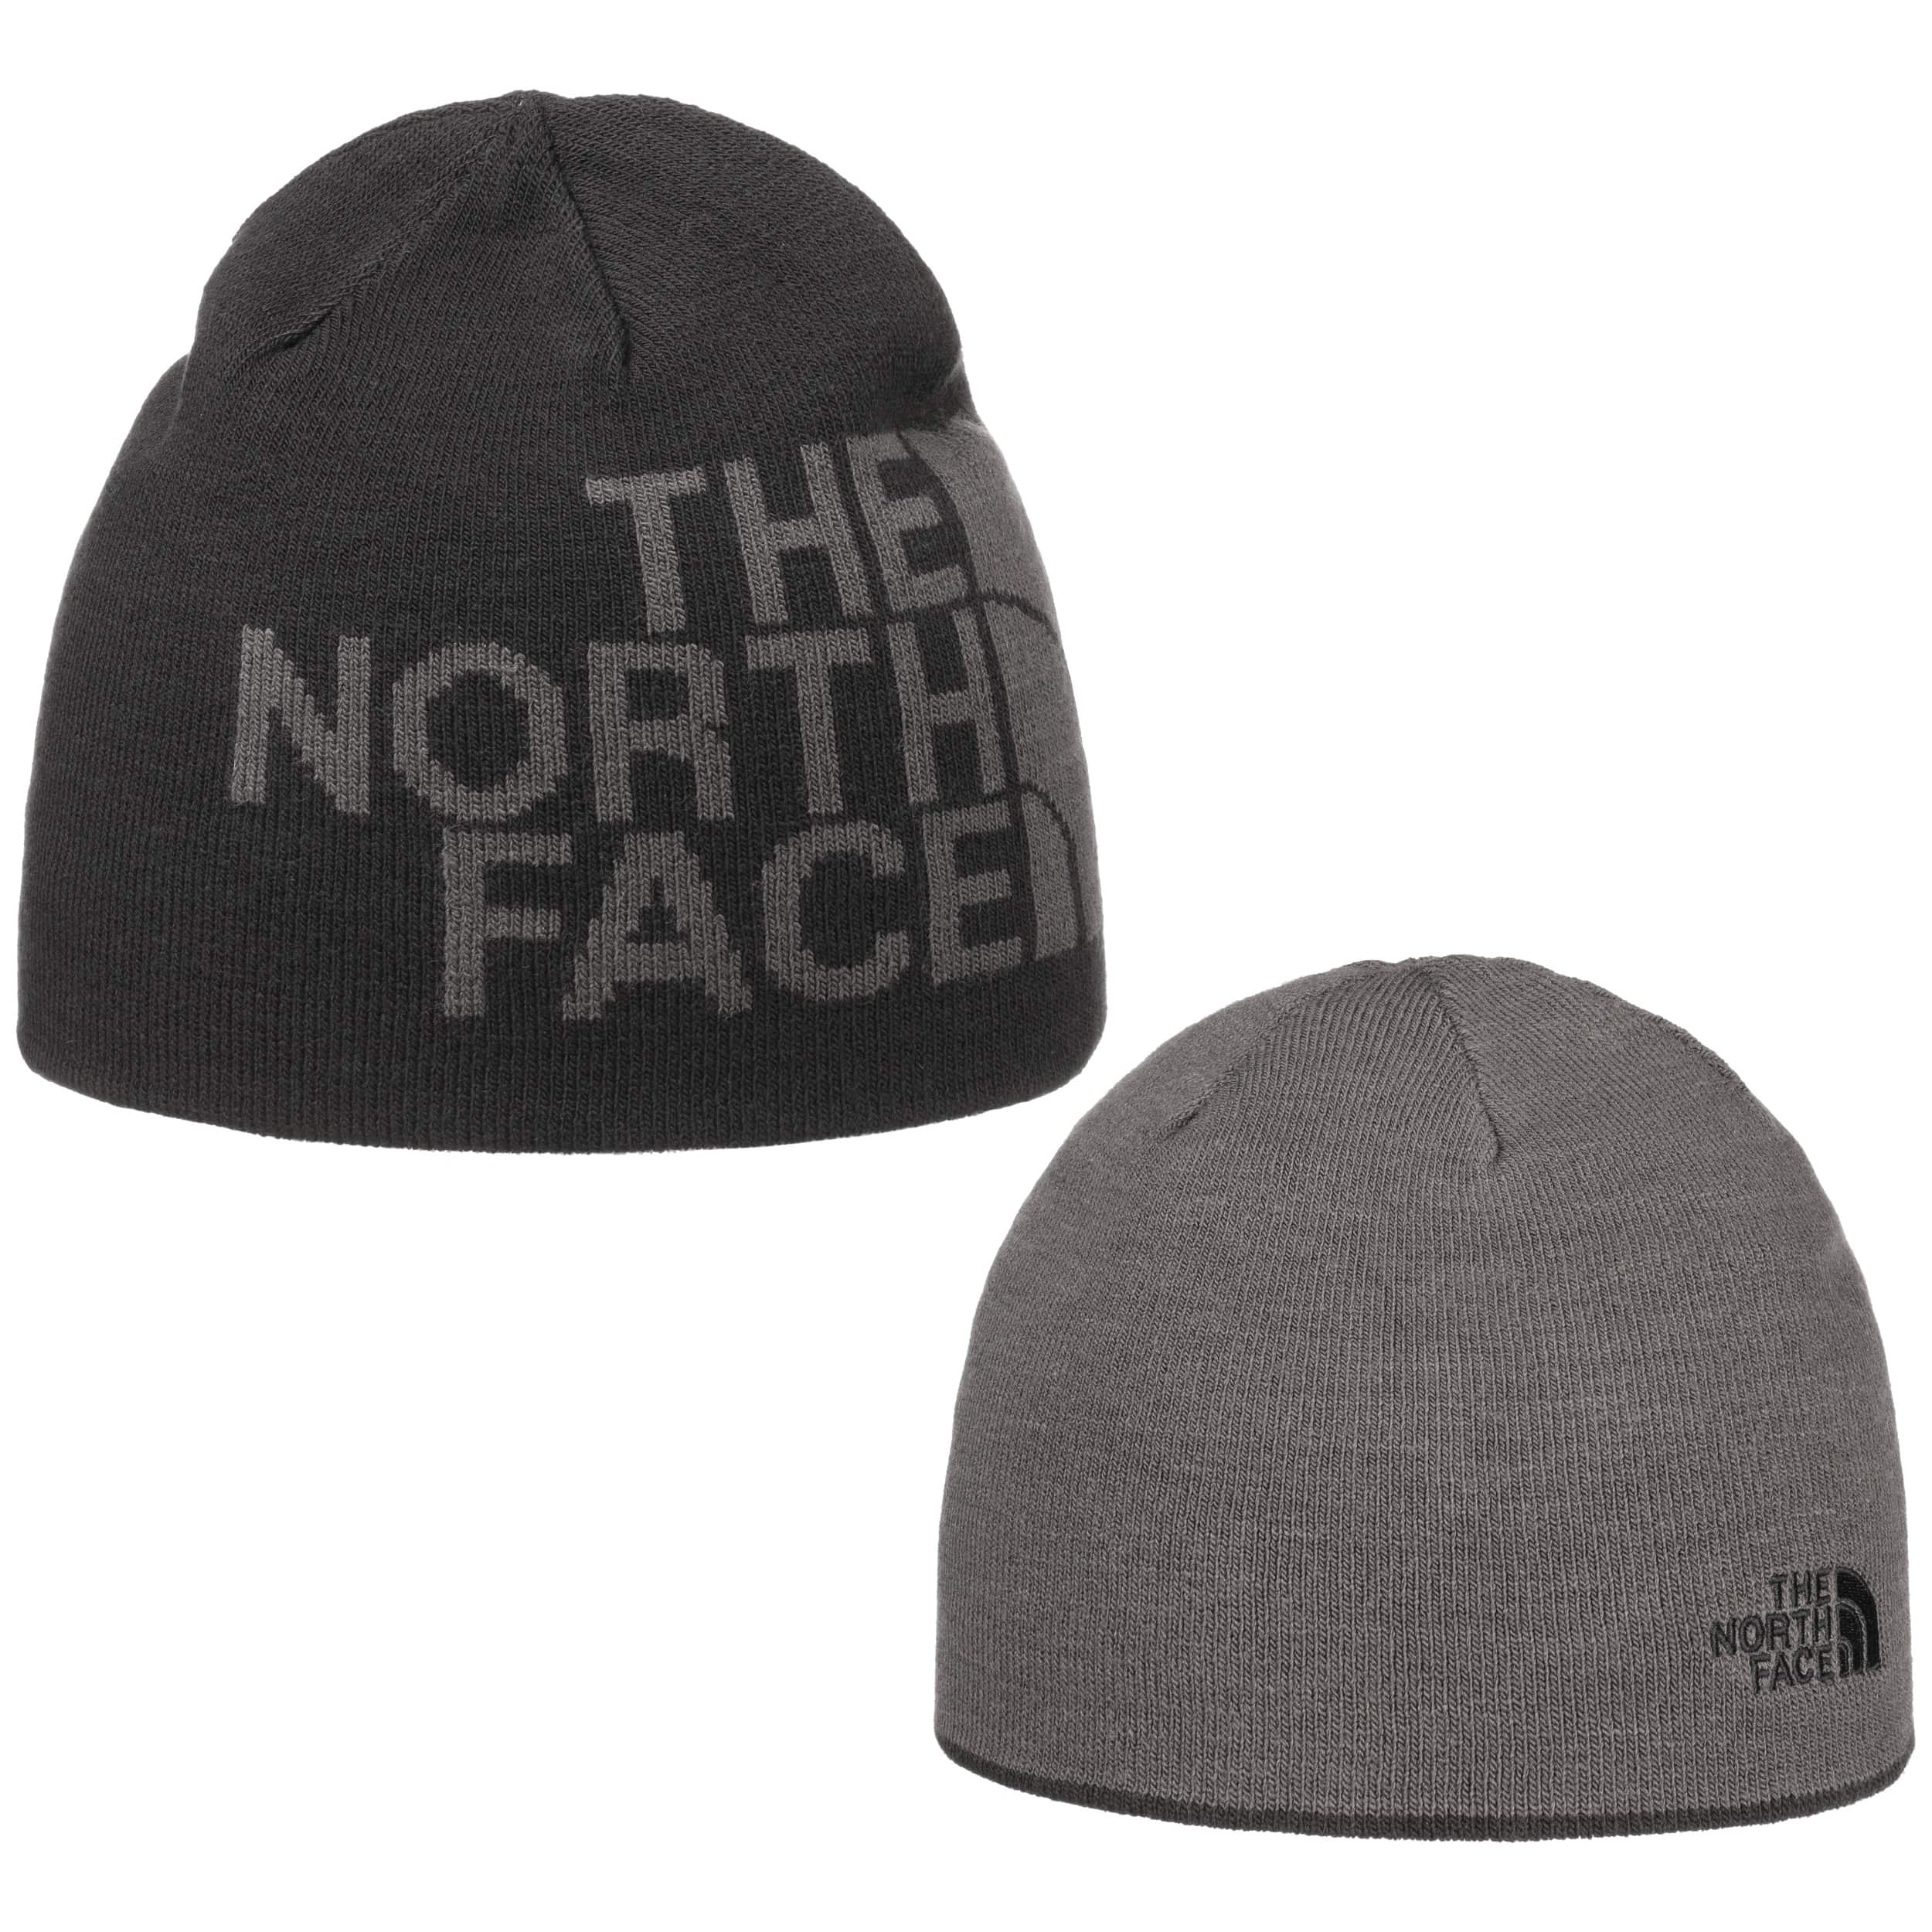 north face beanie hats on sale